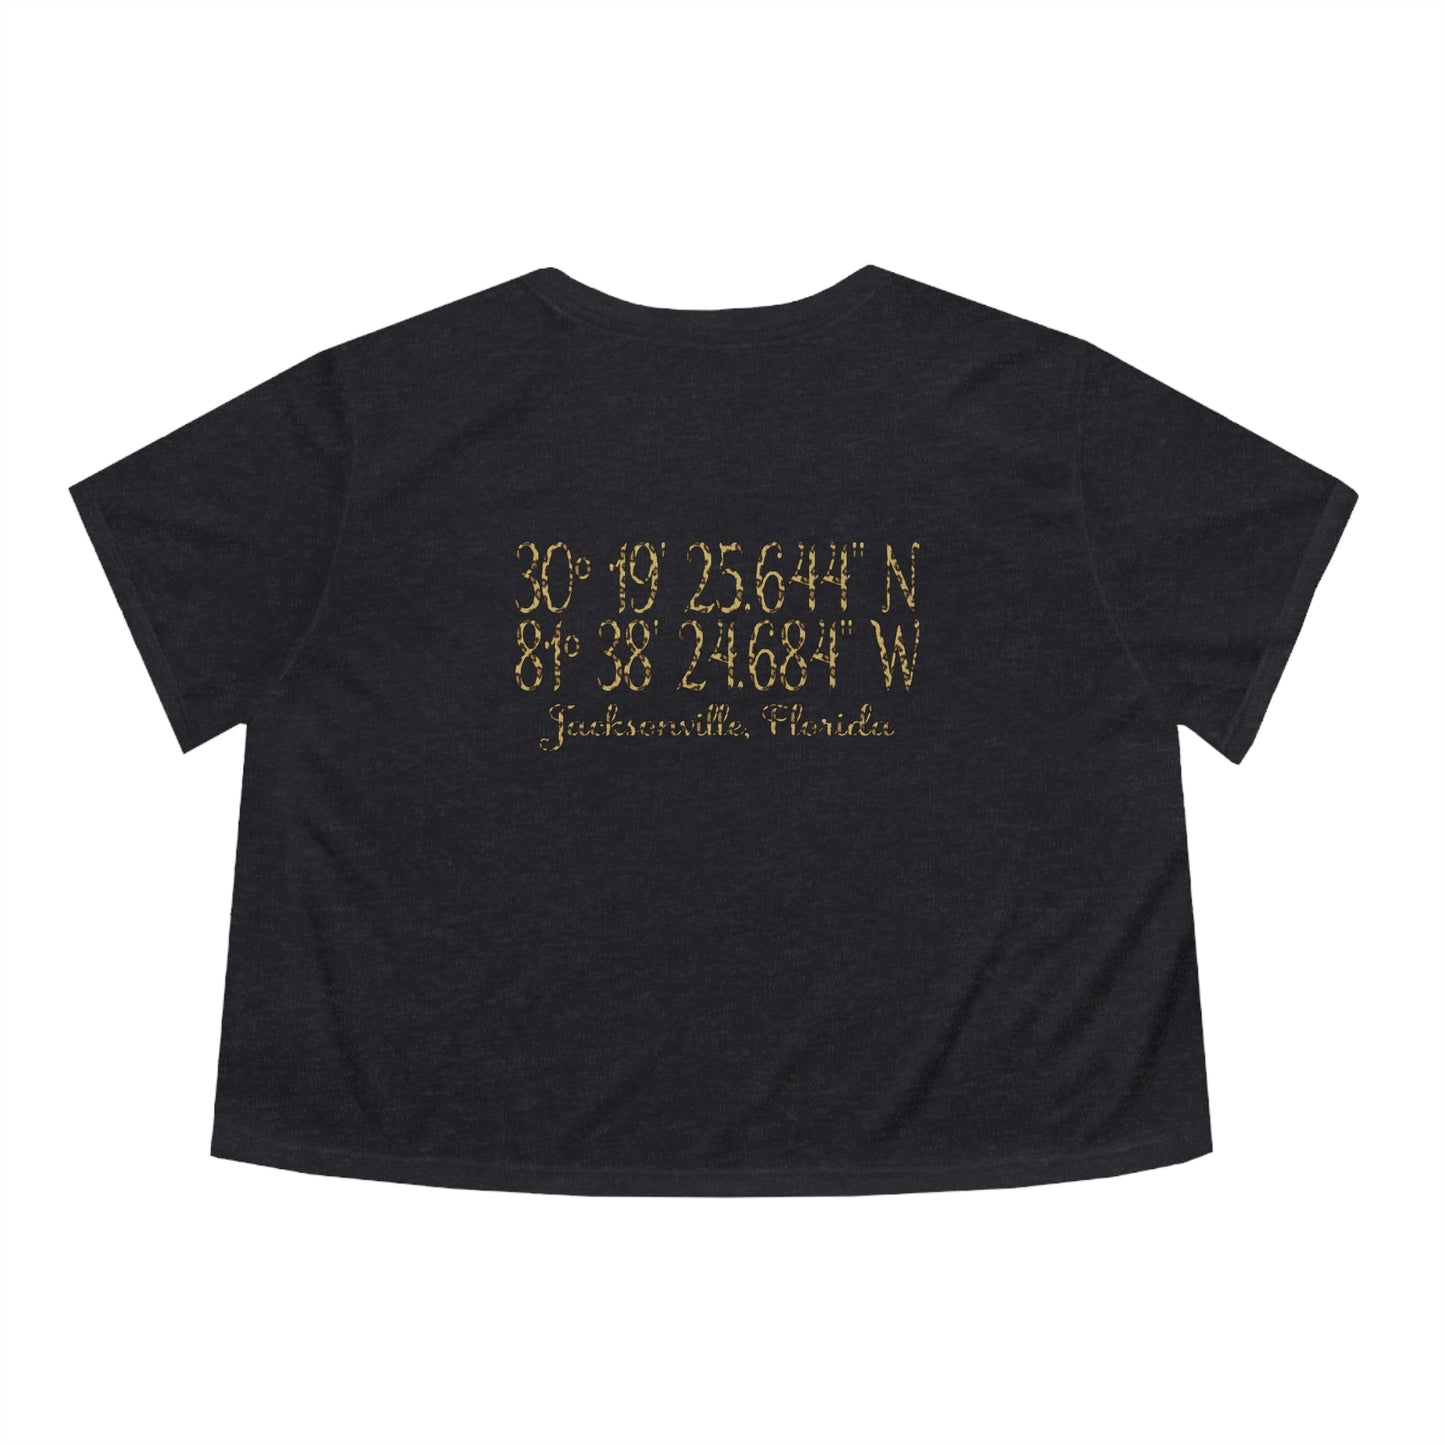 Jaguars Inspired #DTWD Geo-tag Women's Curvy Cropped Tee